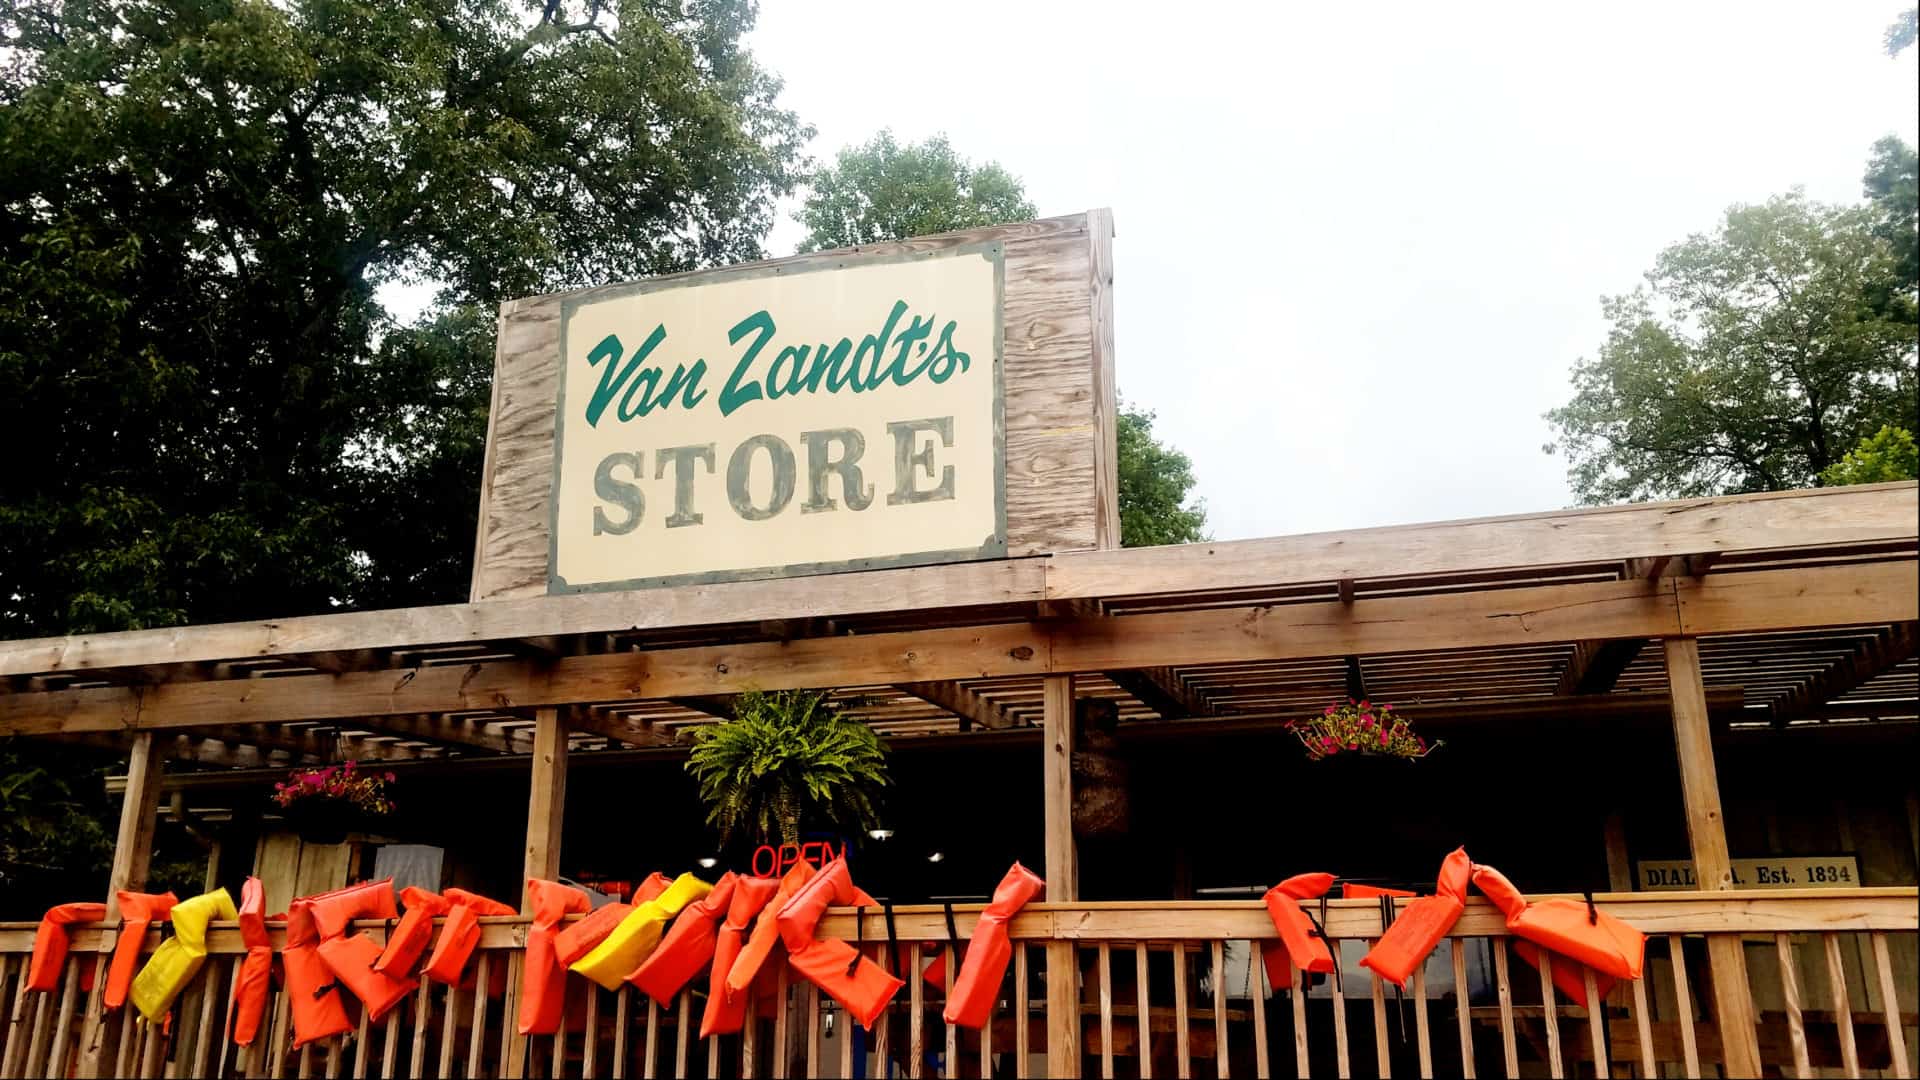 The view of the front porch at Van Zandt's Store in Blue Ridge, Georgia